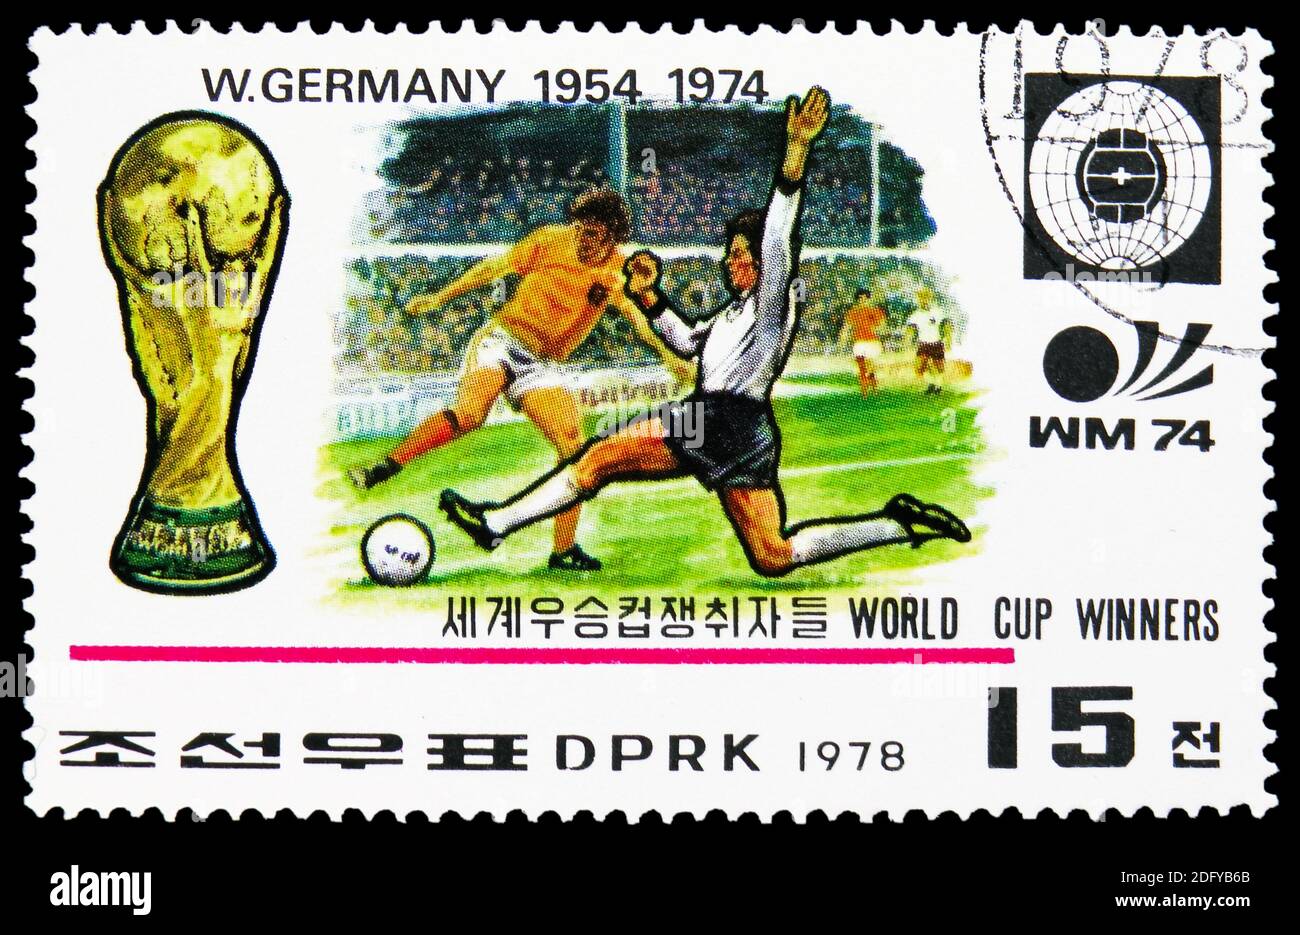 MOSCOW, RUSSIA - SEPTEMBER 16, 2020: Postage stamp printed in Korea North shows West Germany 1954 - 1974, Winner of the FIFA World Cup 1930-1978 serie Stock Photo